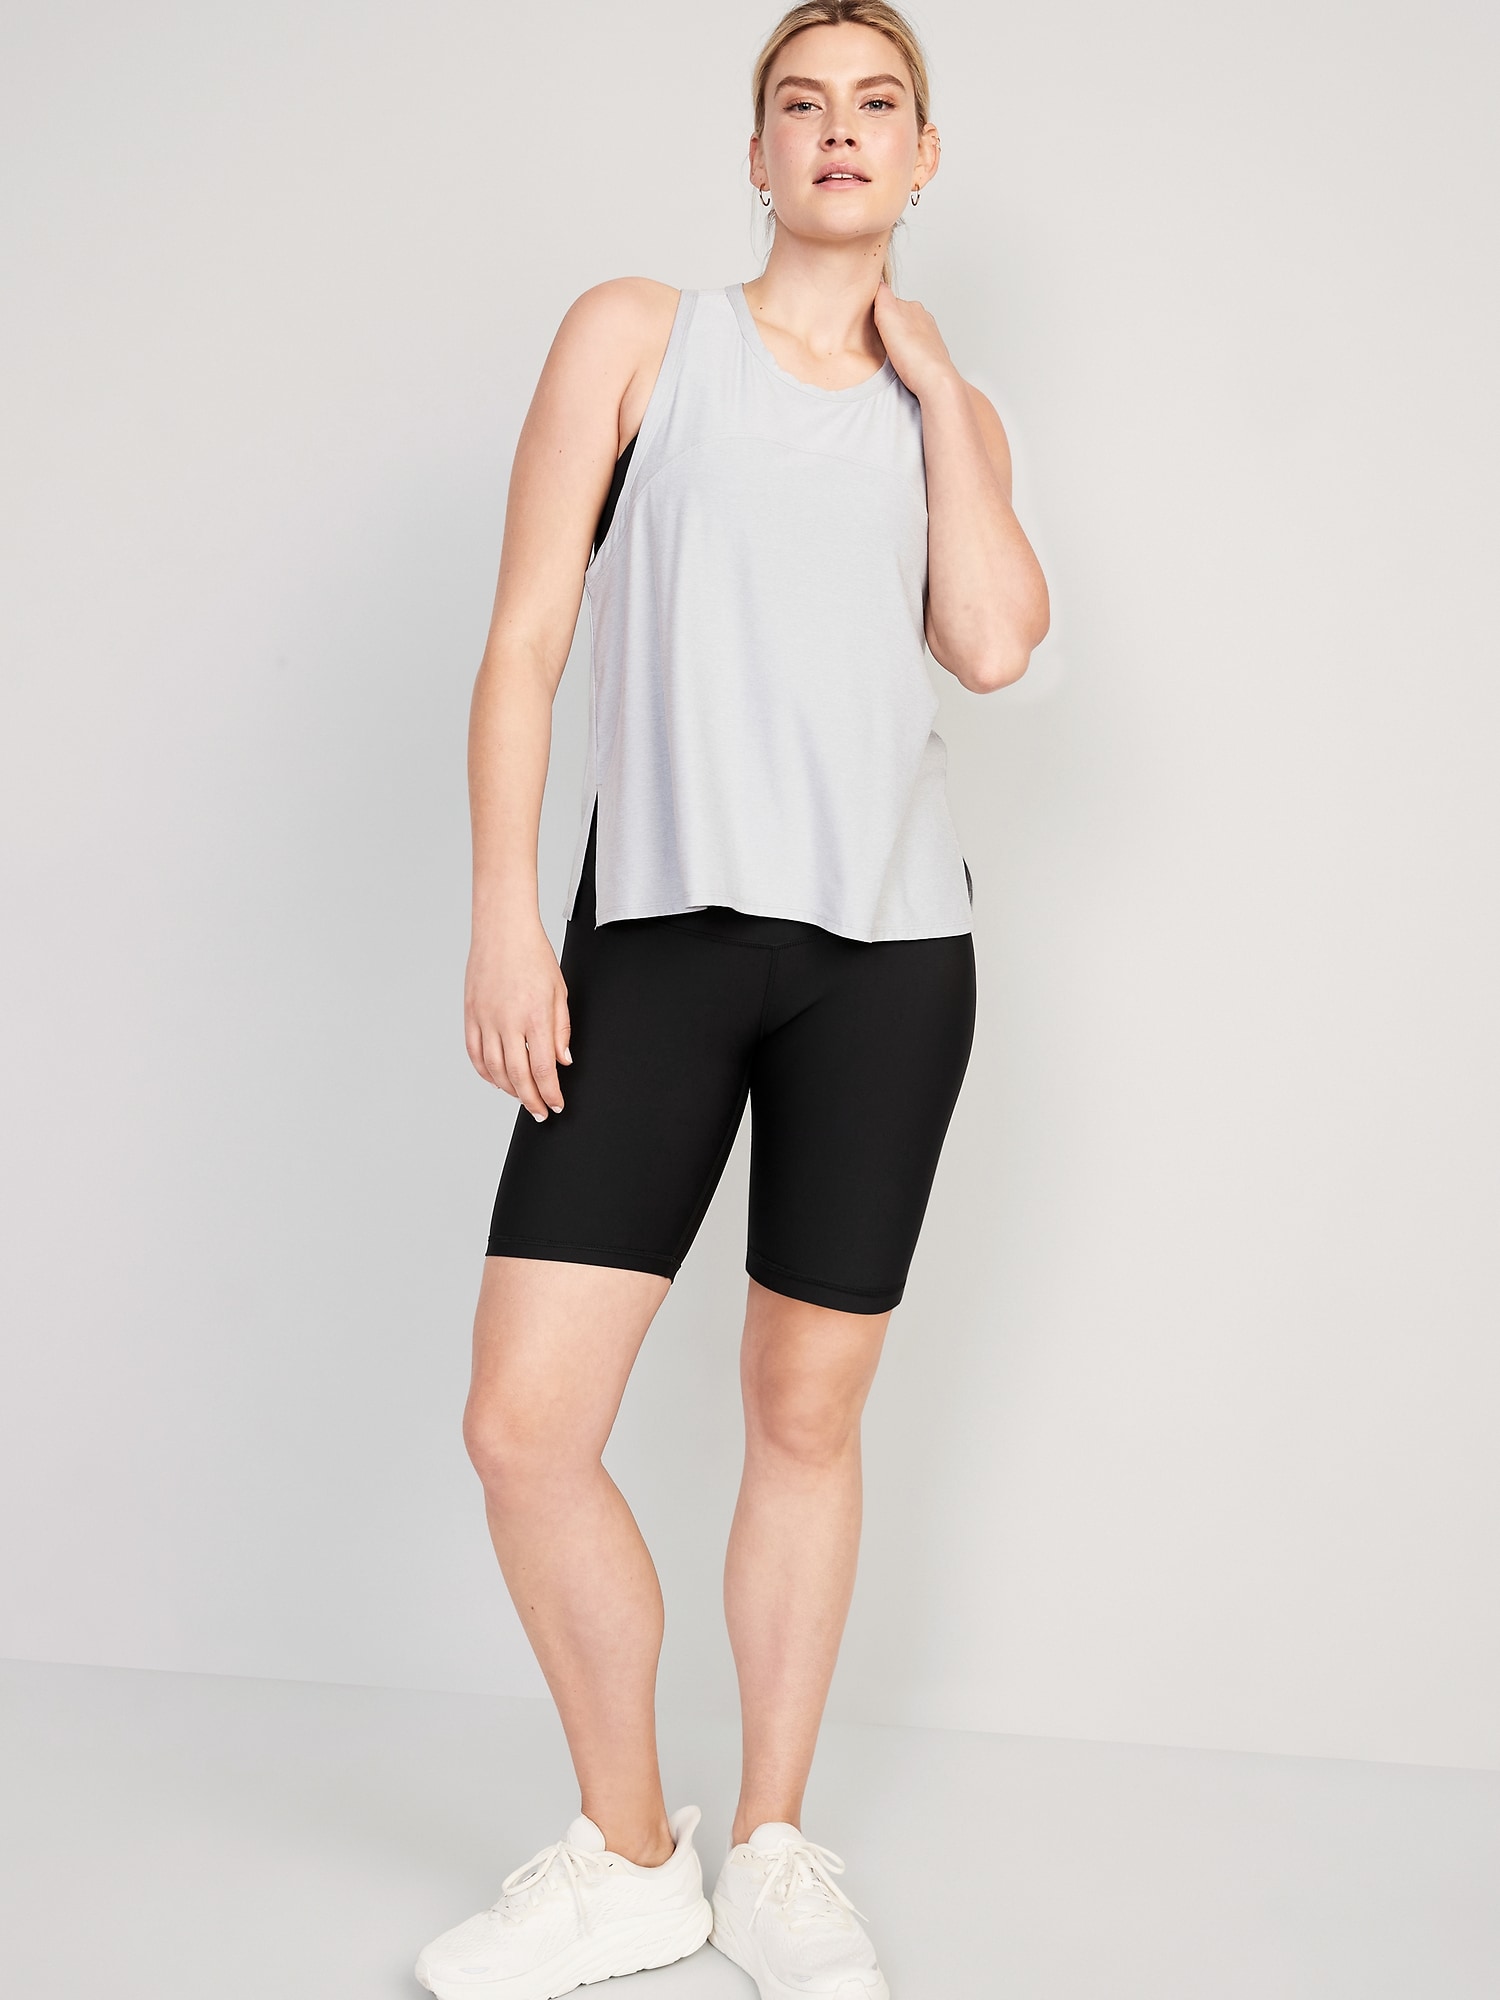 Postpartum recovery isn't always comfy, but these postpartum recovery biker  shorts are #postpartummusthaves #postpartummama…